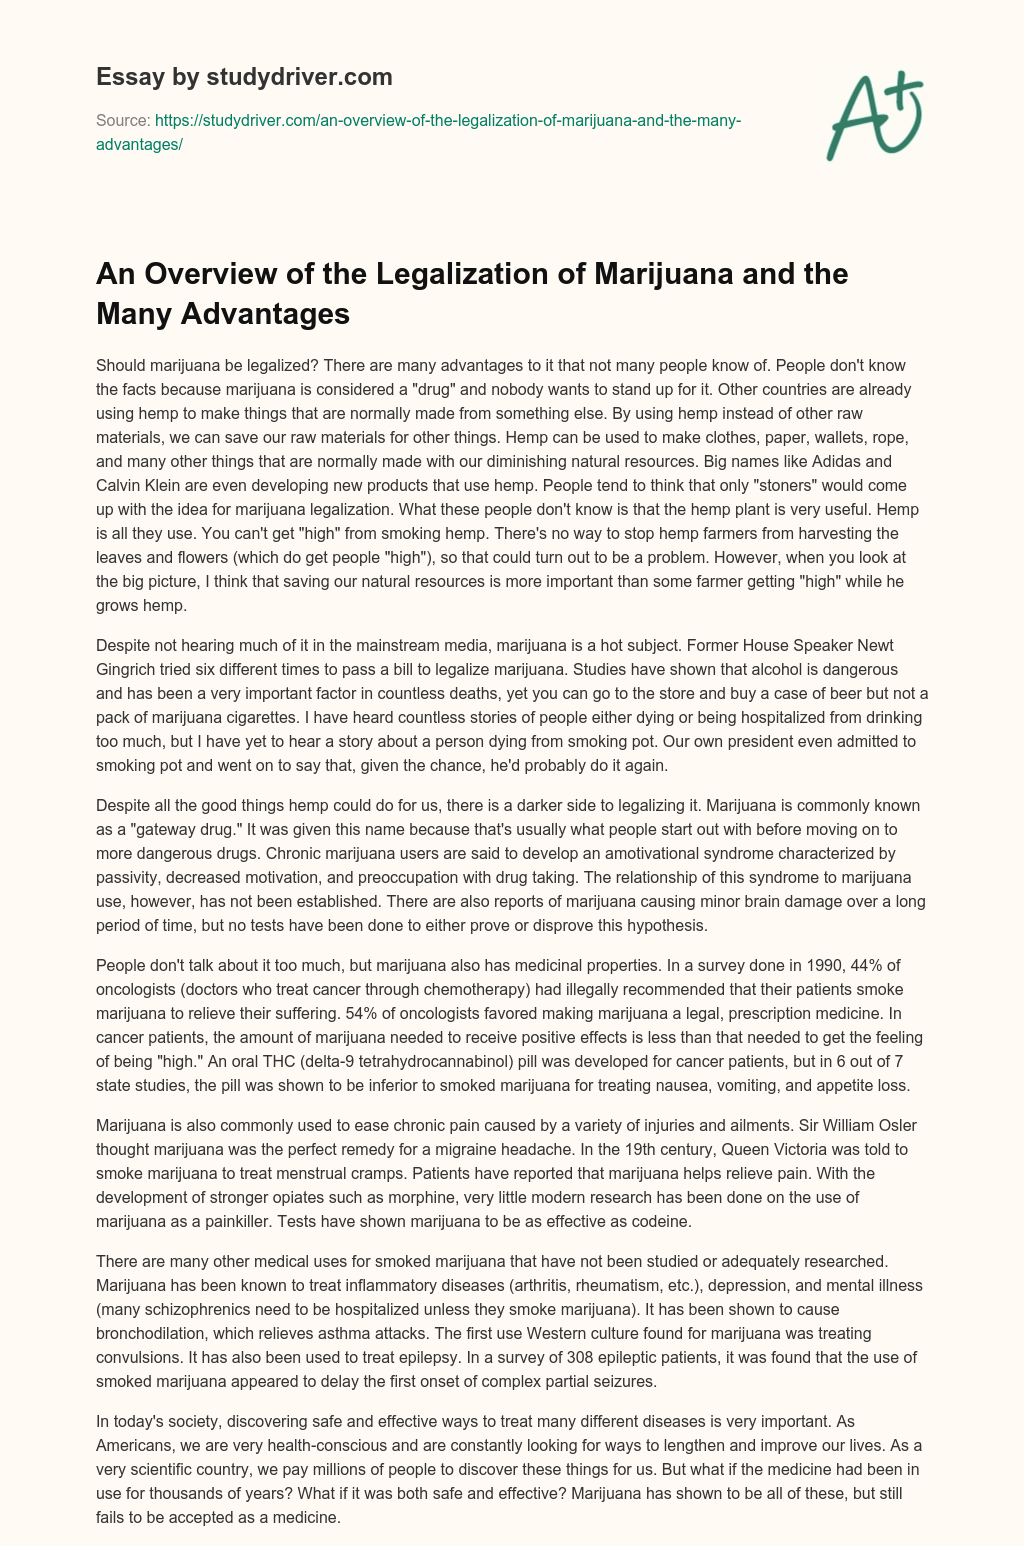 An Overview of the Legalization of Marijuana and the Many Advantages essay